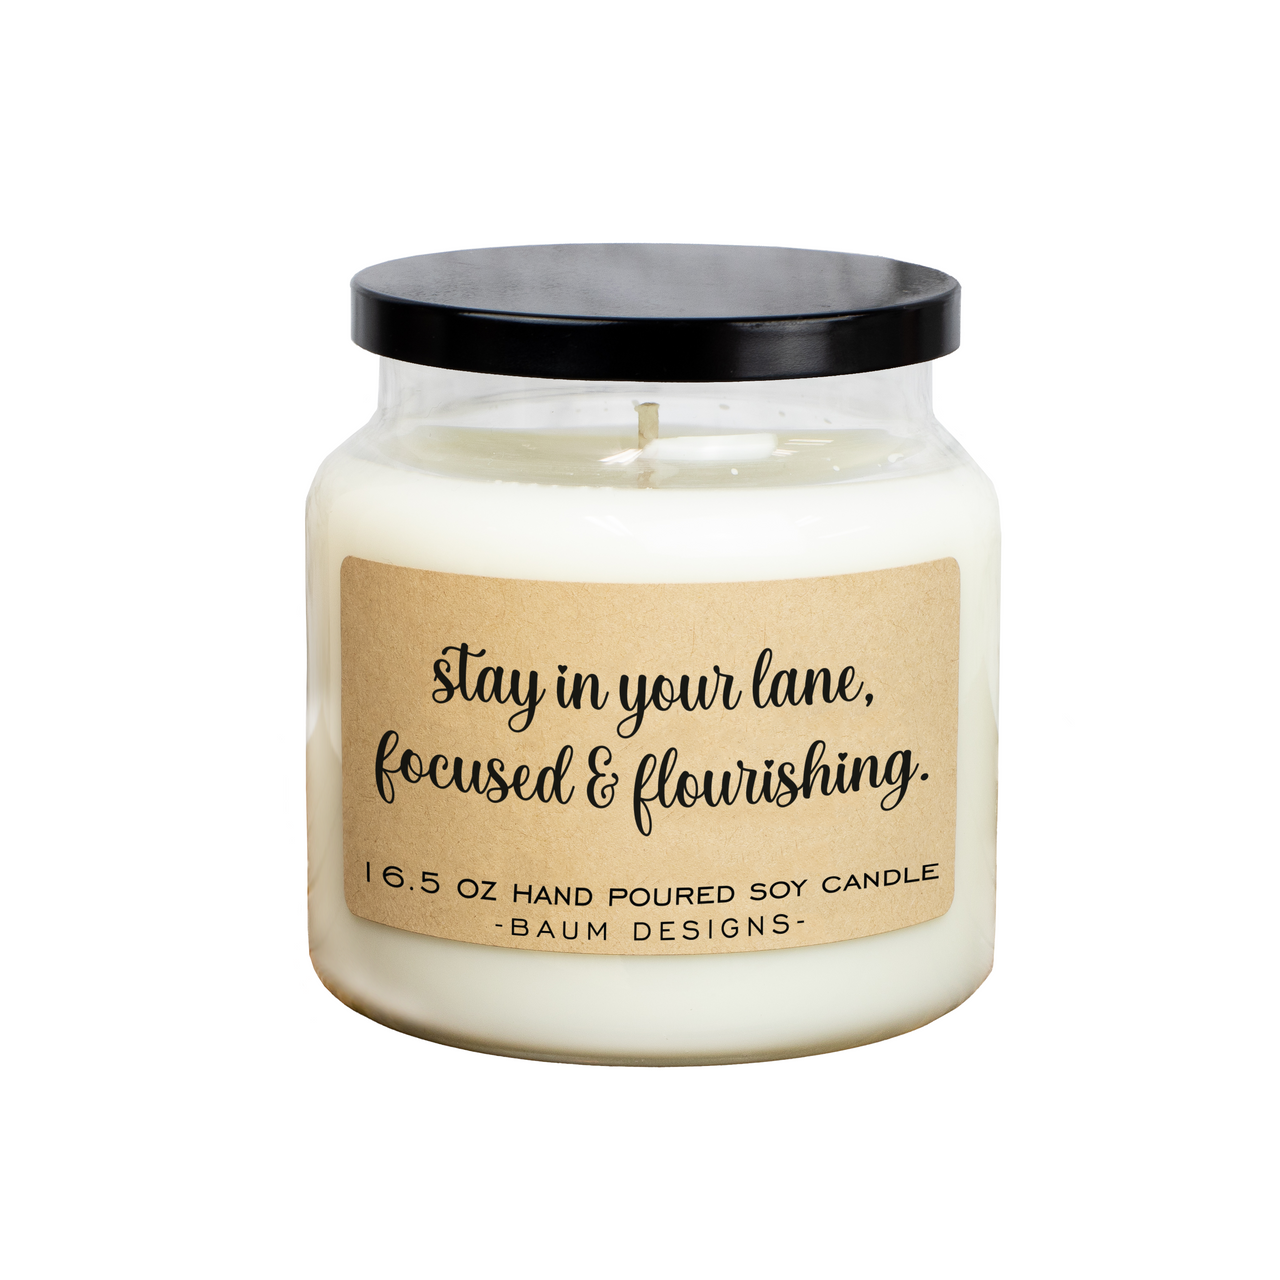 Stay In Your Lane, Focused & Flourishing Soy Candle Baum Designs